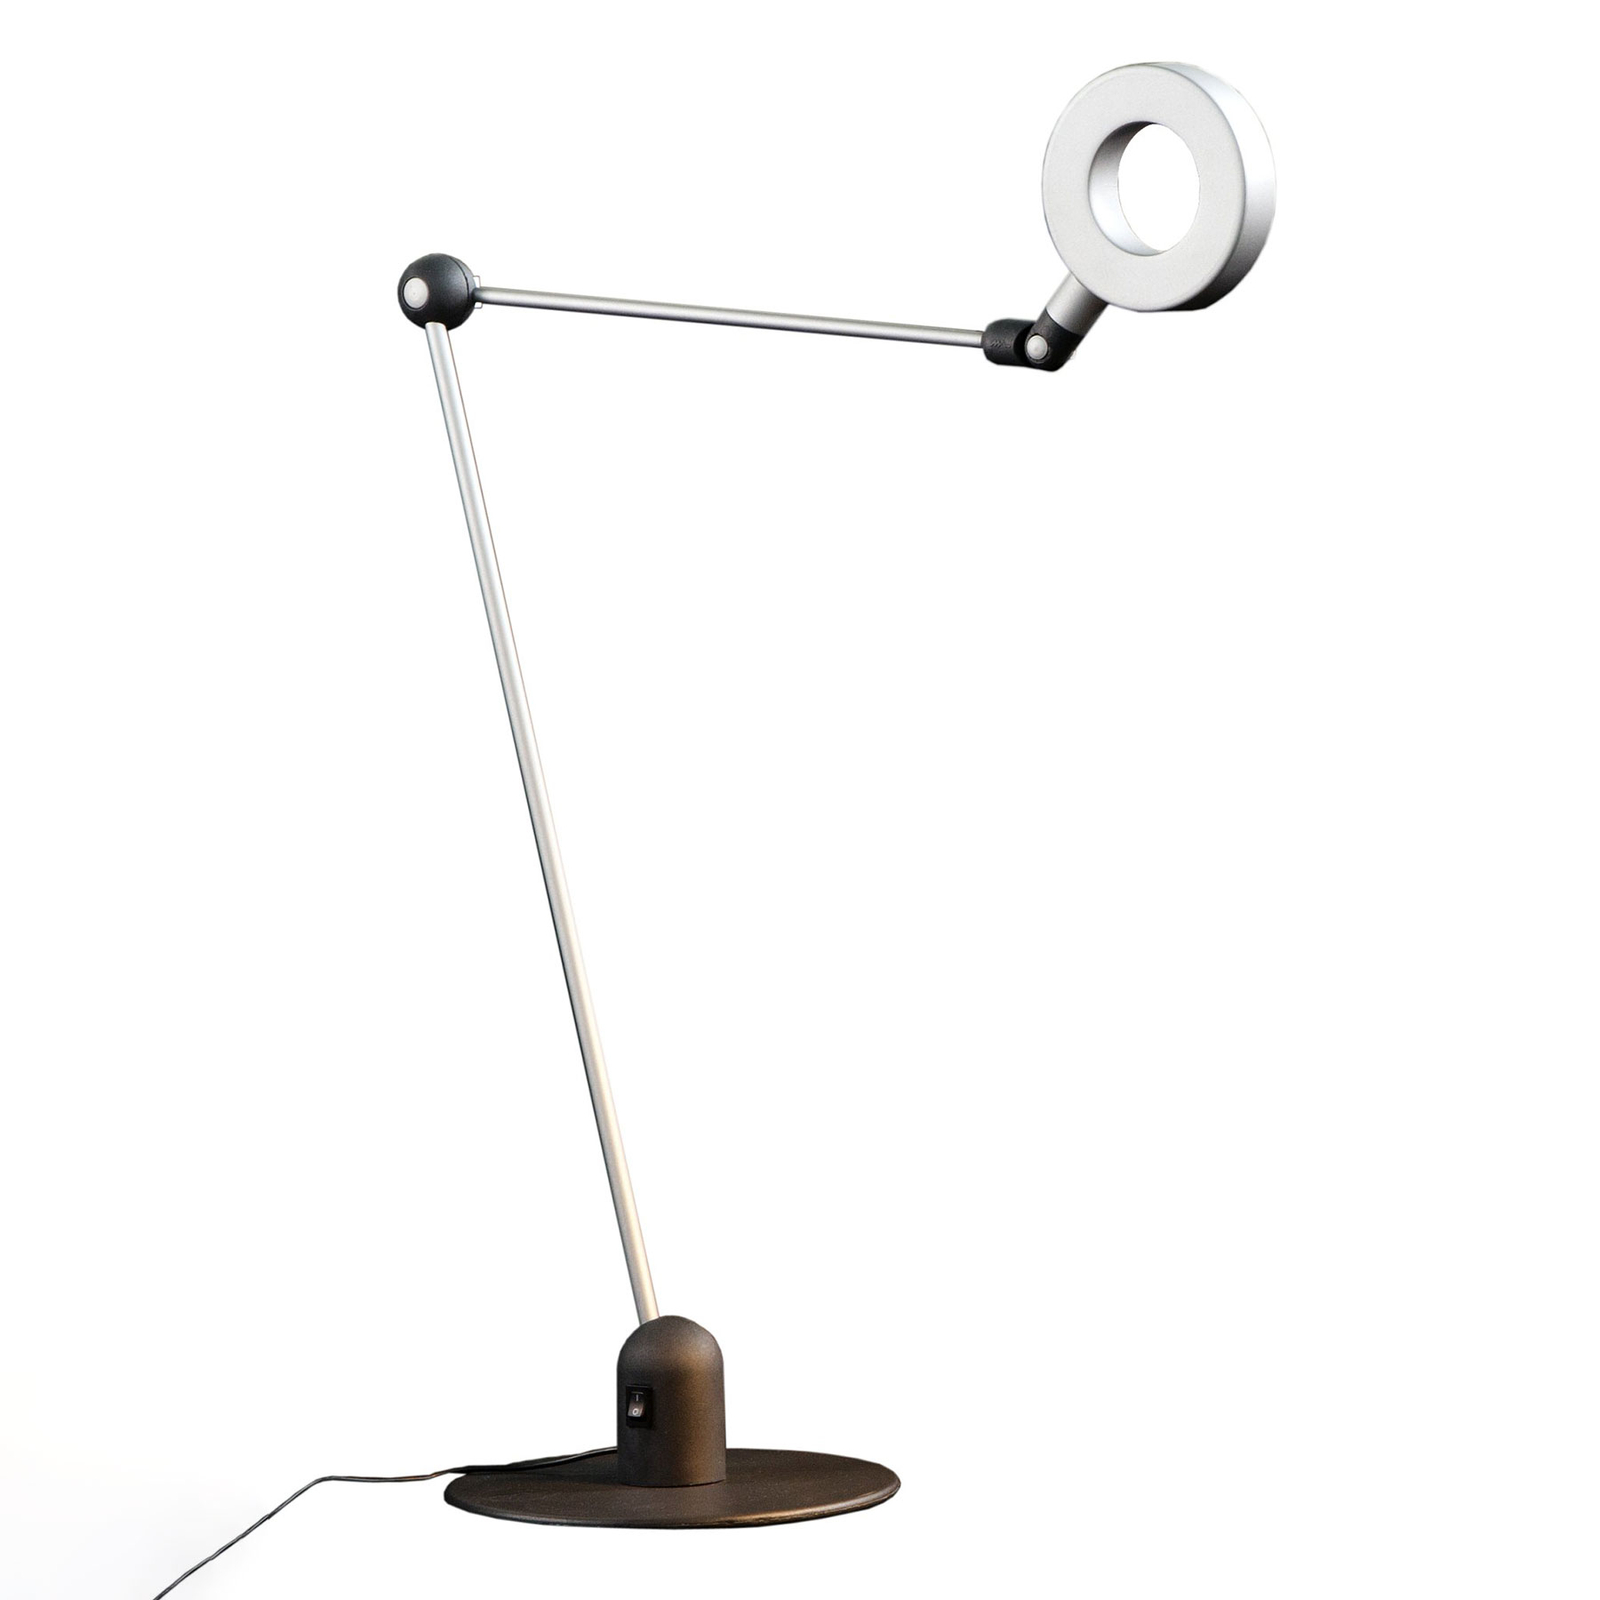 Martinelli Luce L’amica LED table lamp, grey